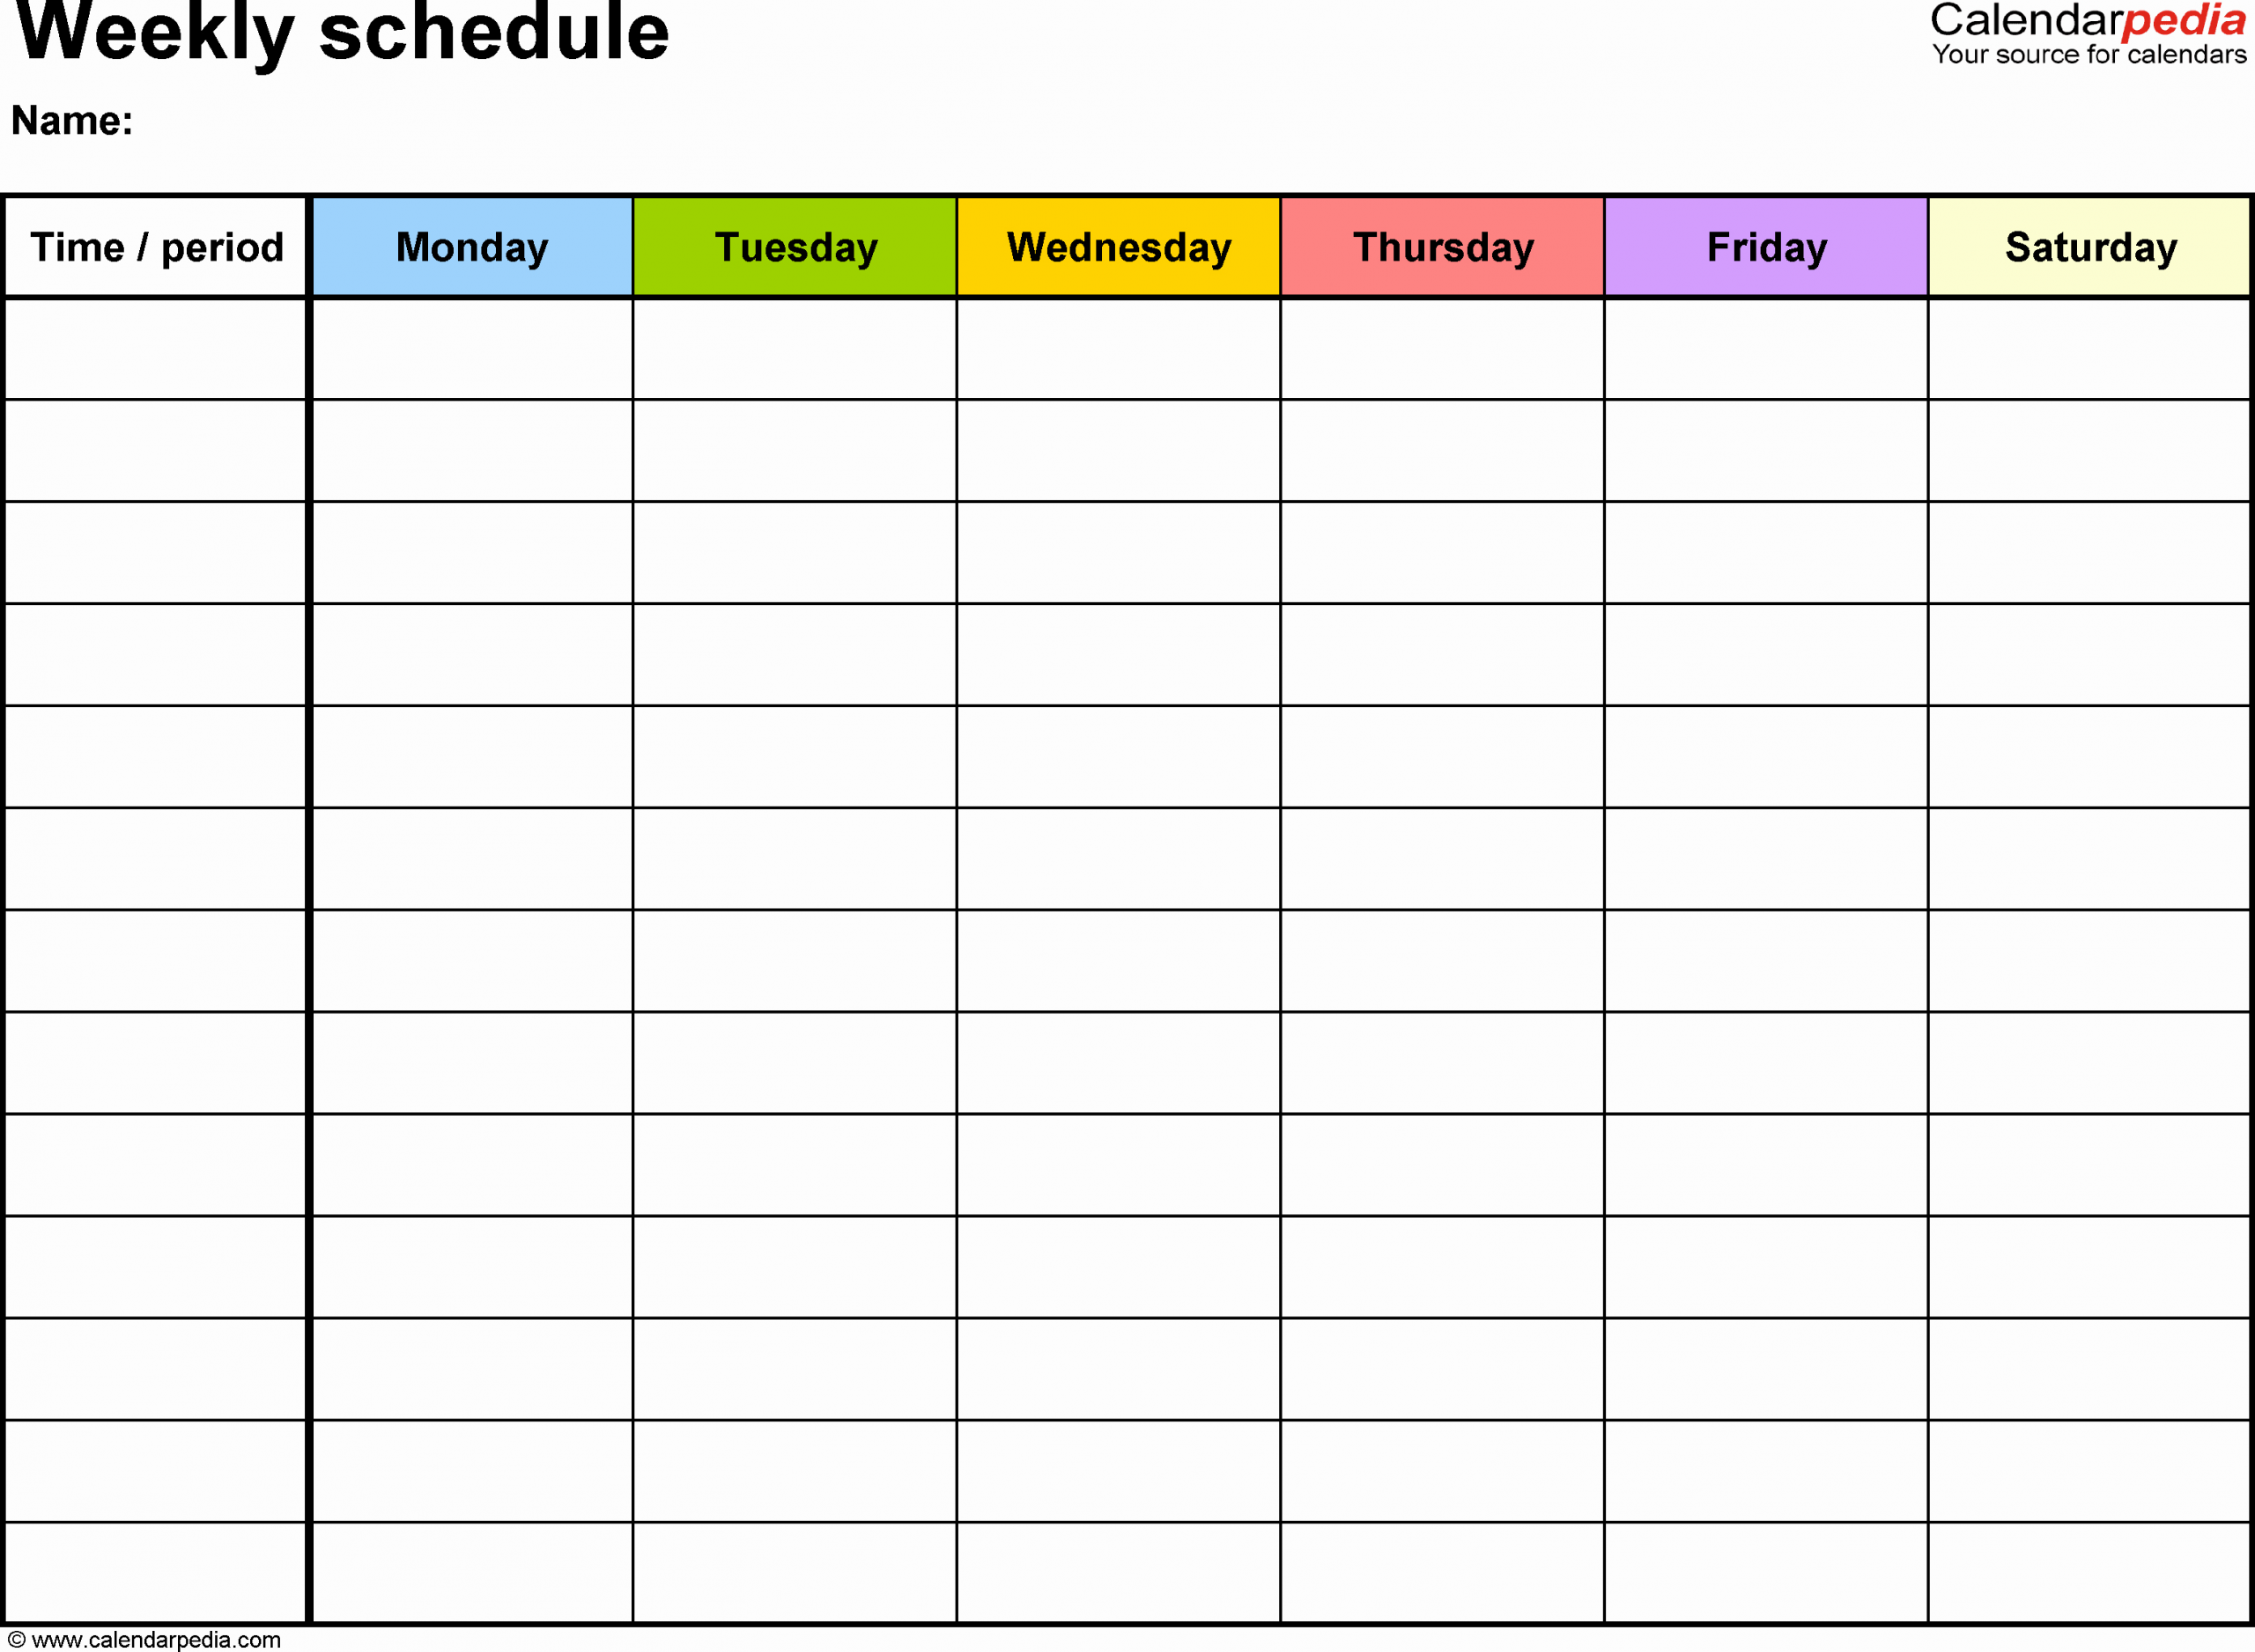 Sunday School Schedule Template Awesome Free Weekly Schedule Templates for Word 18 Templates